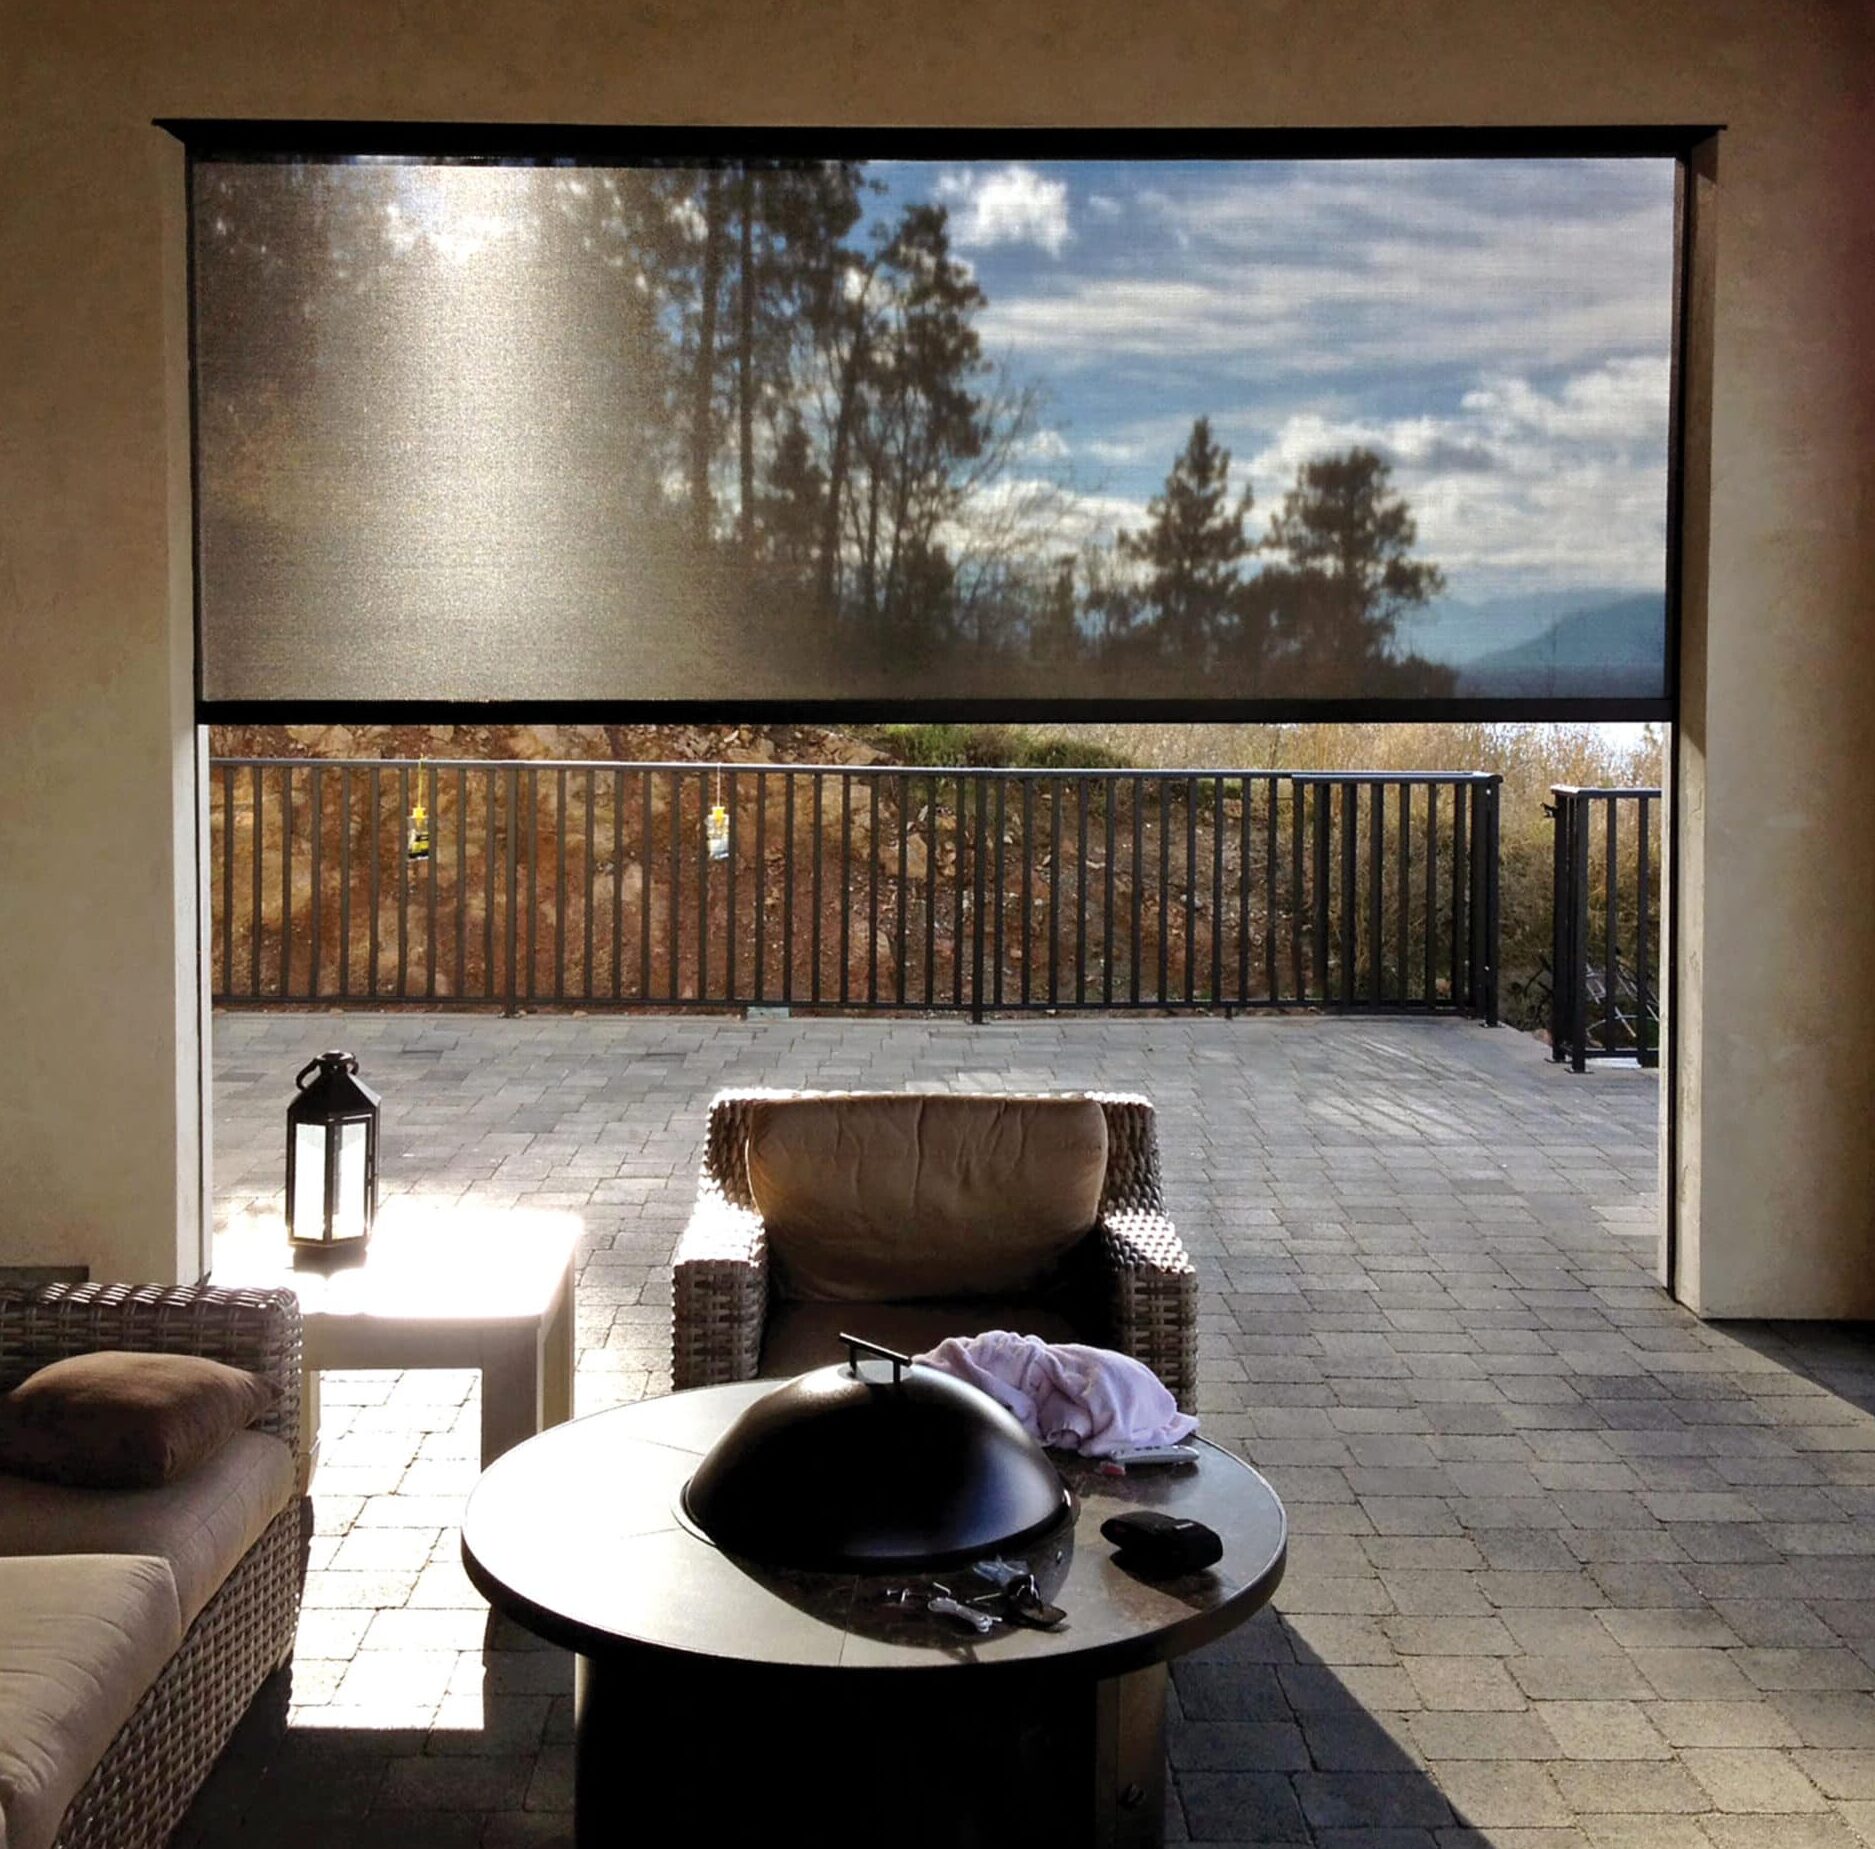 Create More Privacy Around Your Hot Tub with SummerSpace.